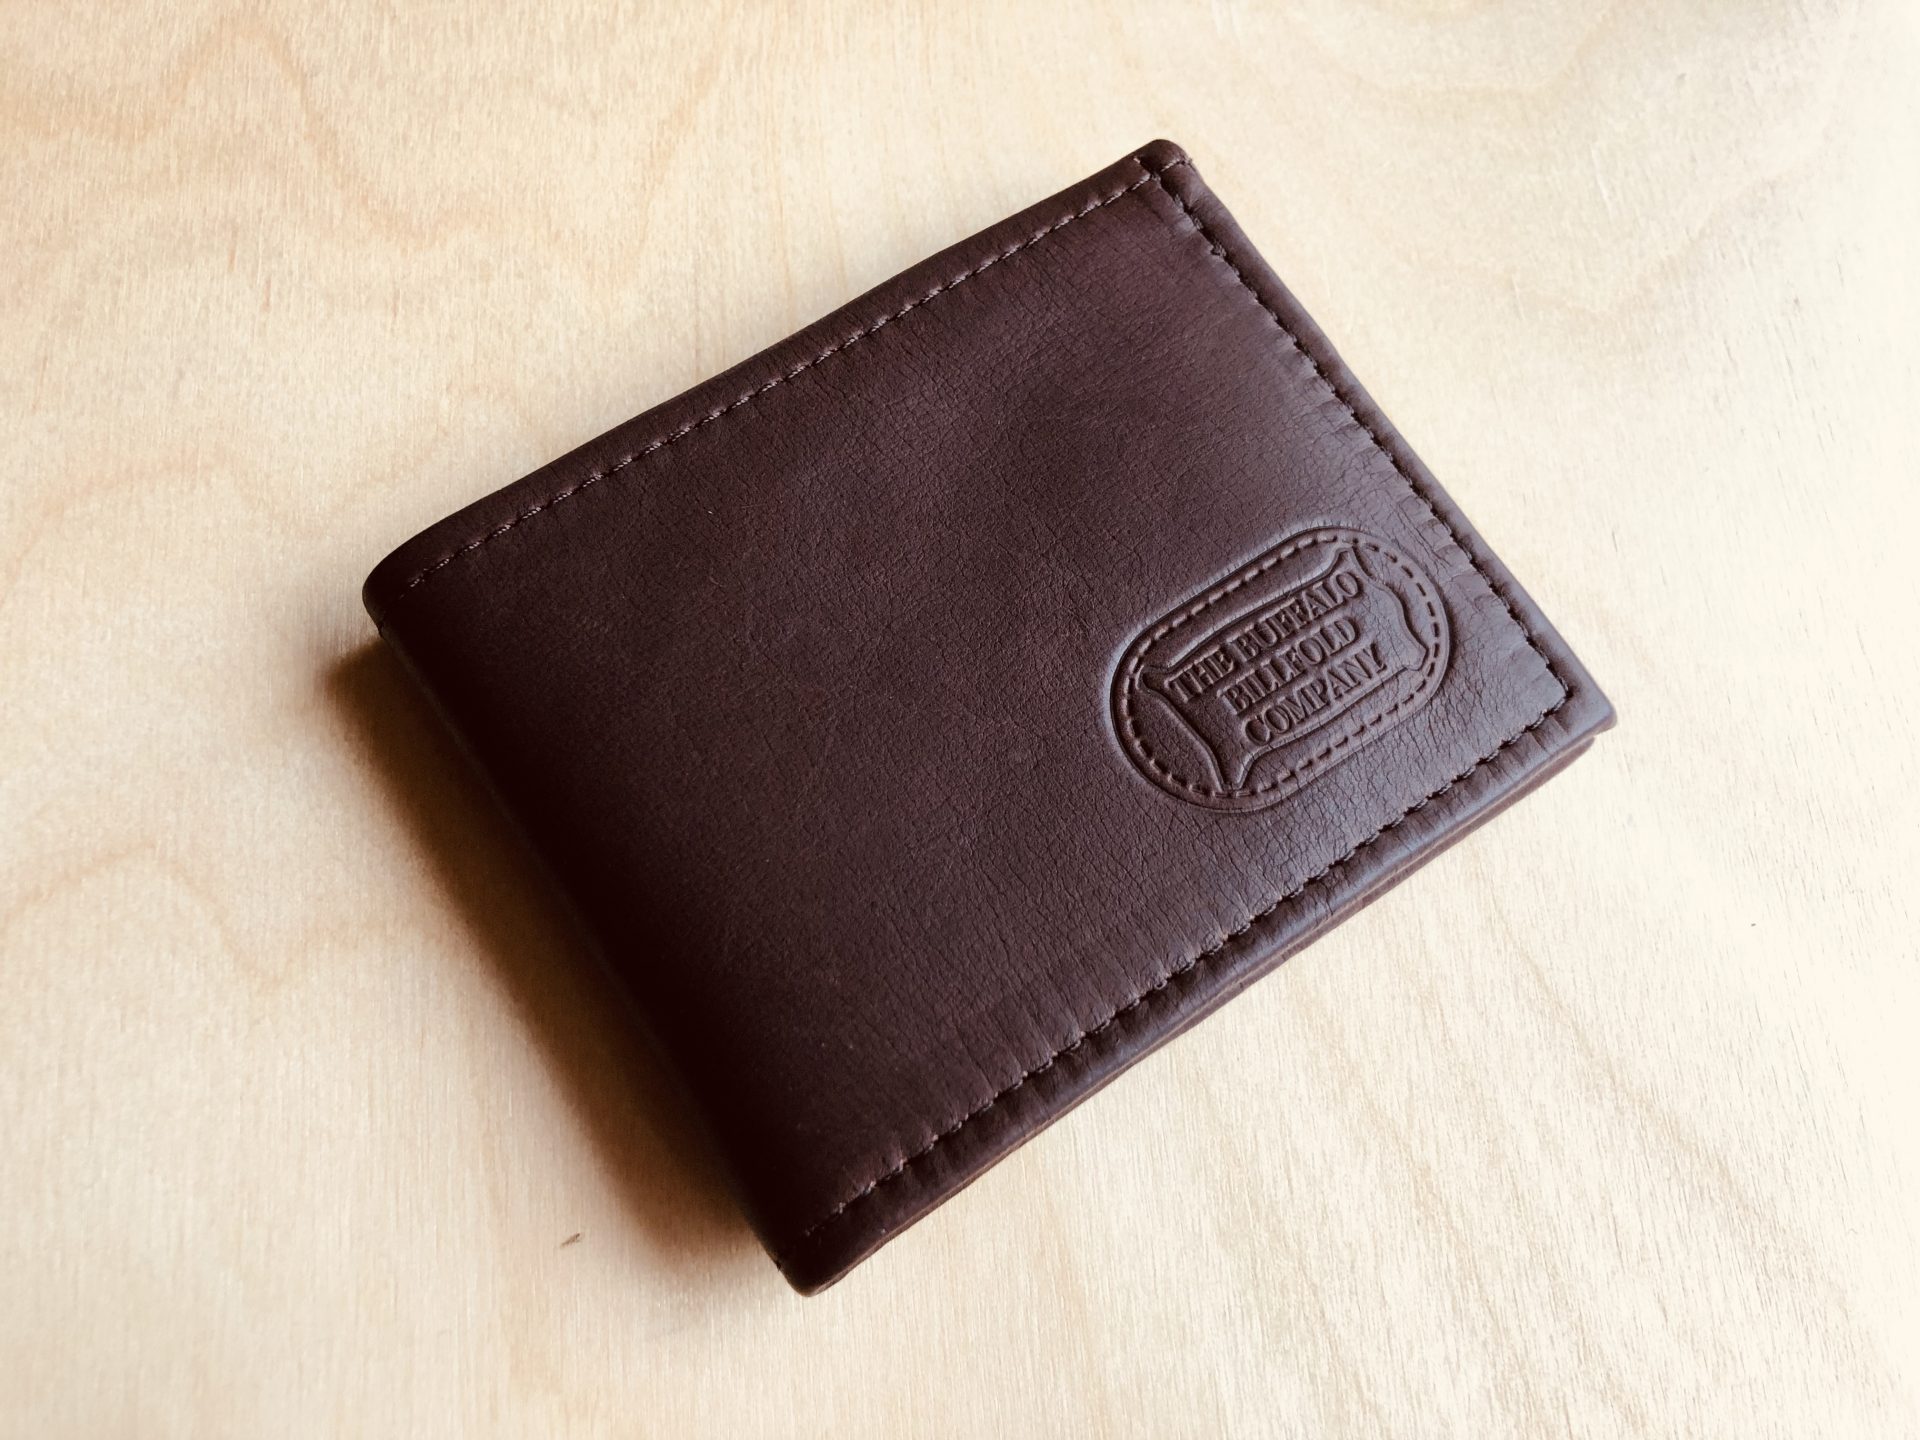 Thuisland Ploeg complexiteit Buffalo Leather RFID Wallet - RFID Blocking Protection - Made in USA